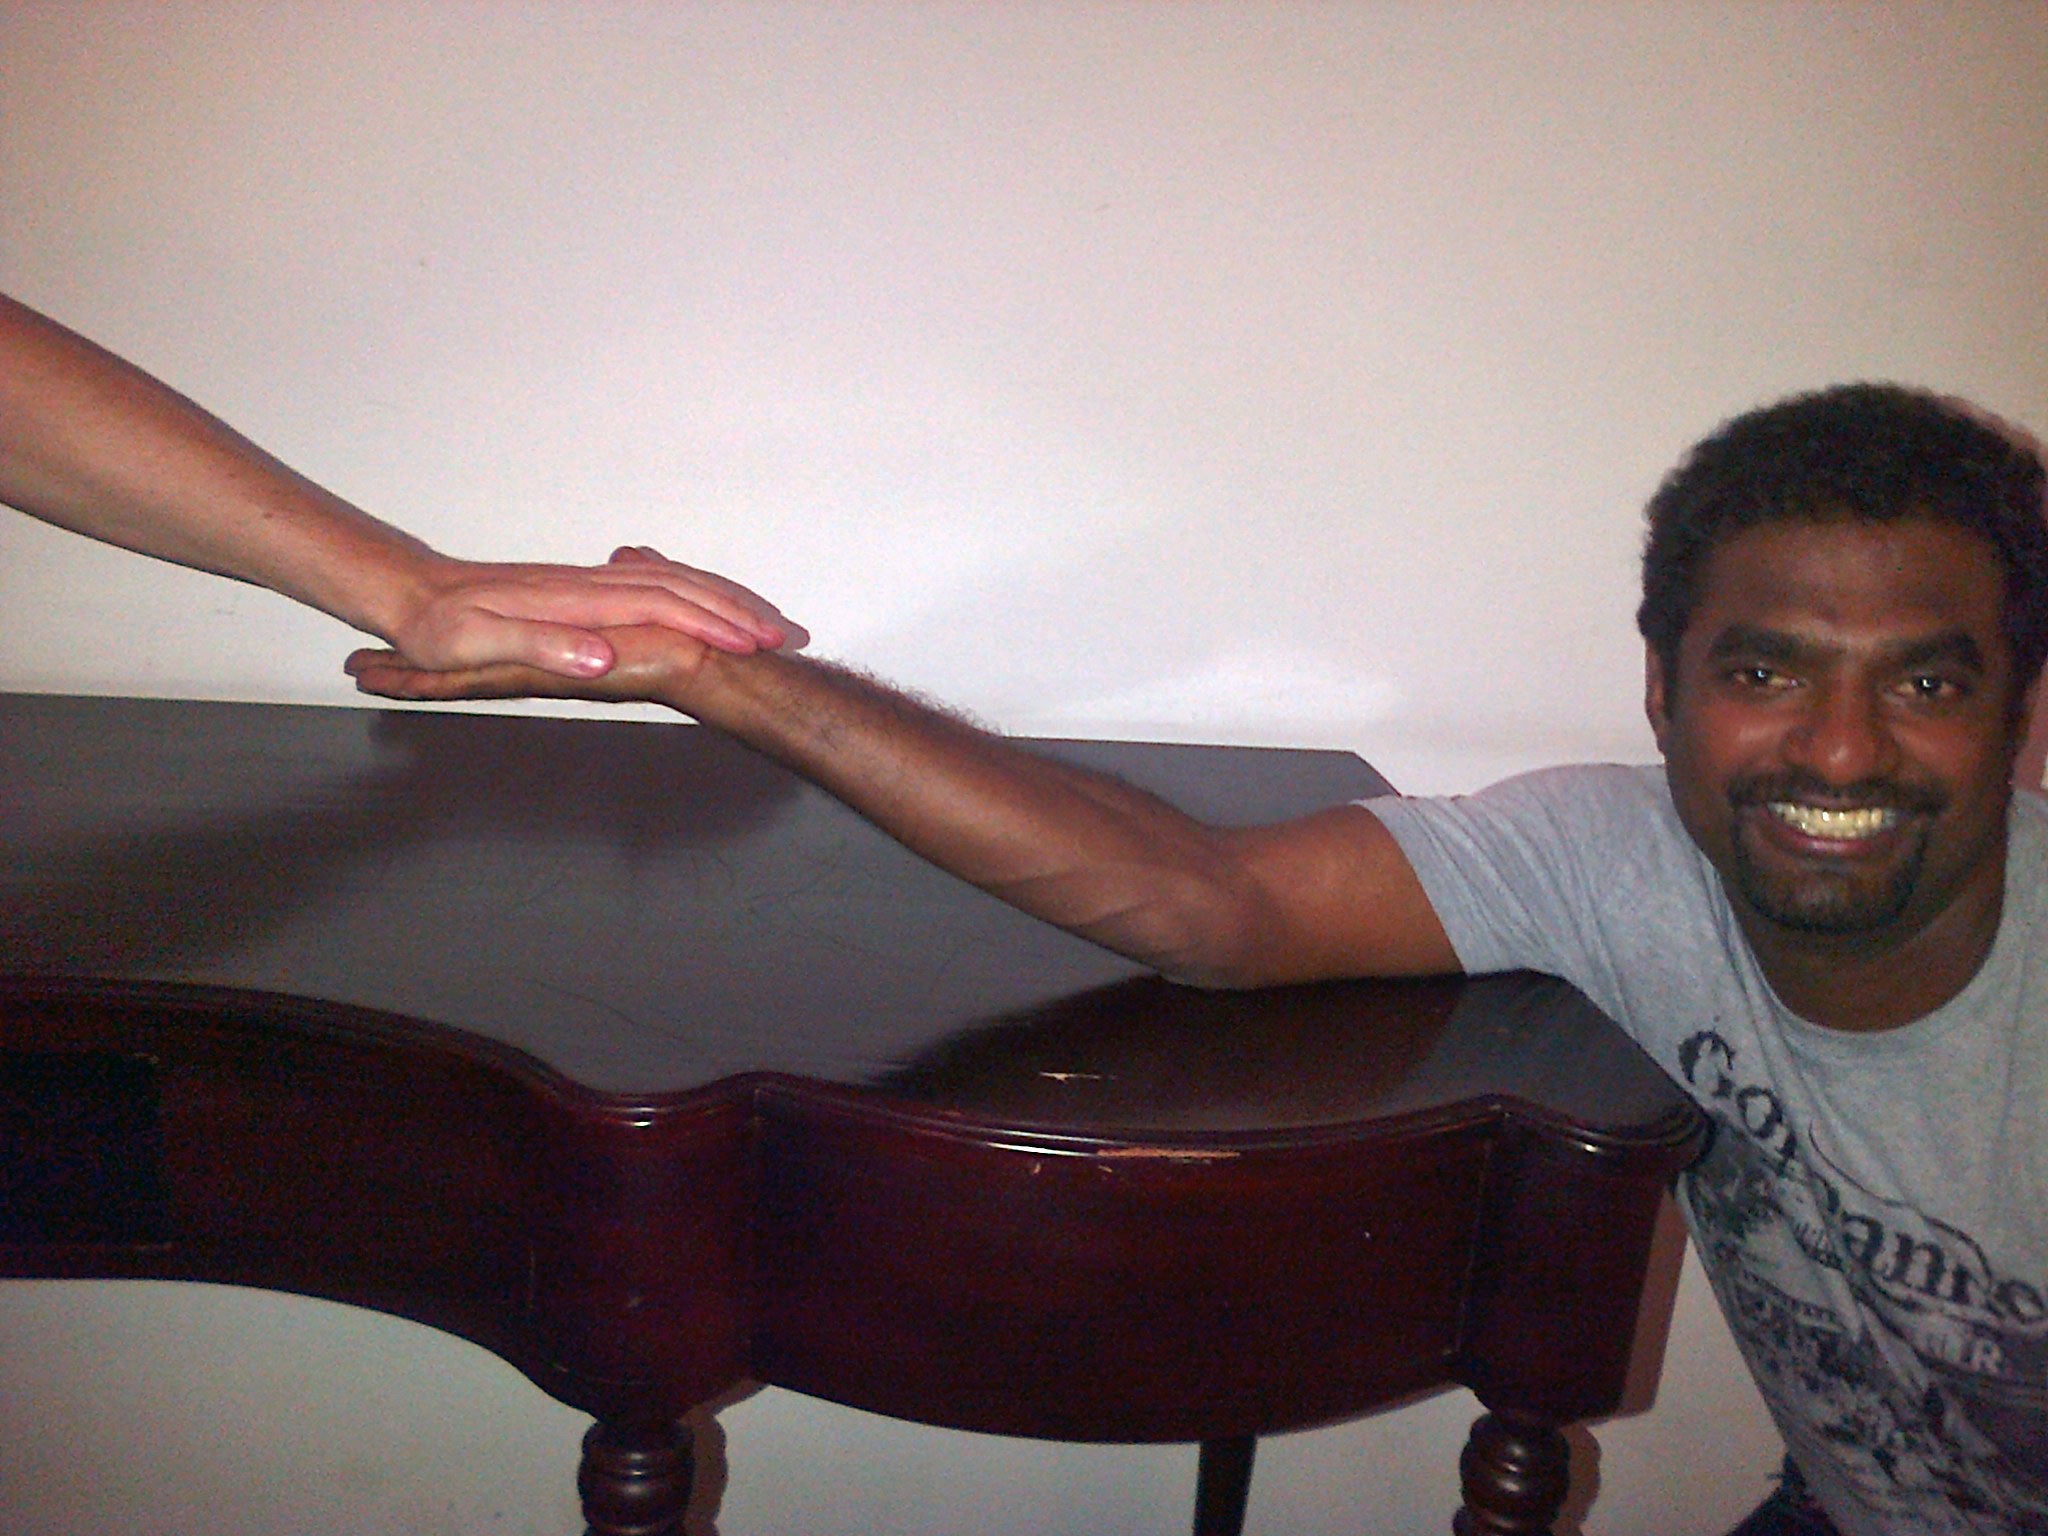 Murali proving his arm cannot be straightened